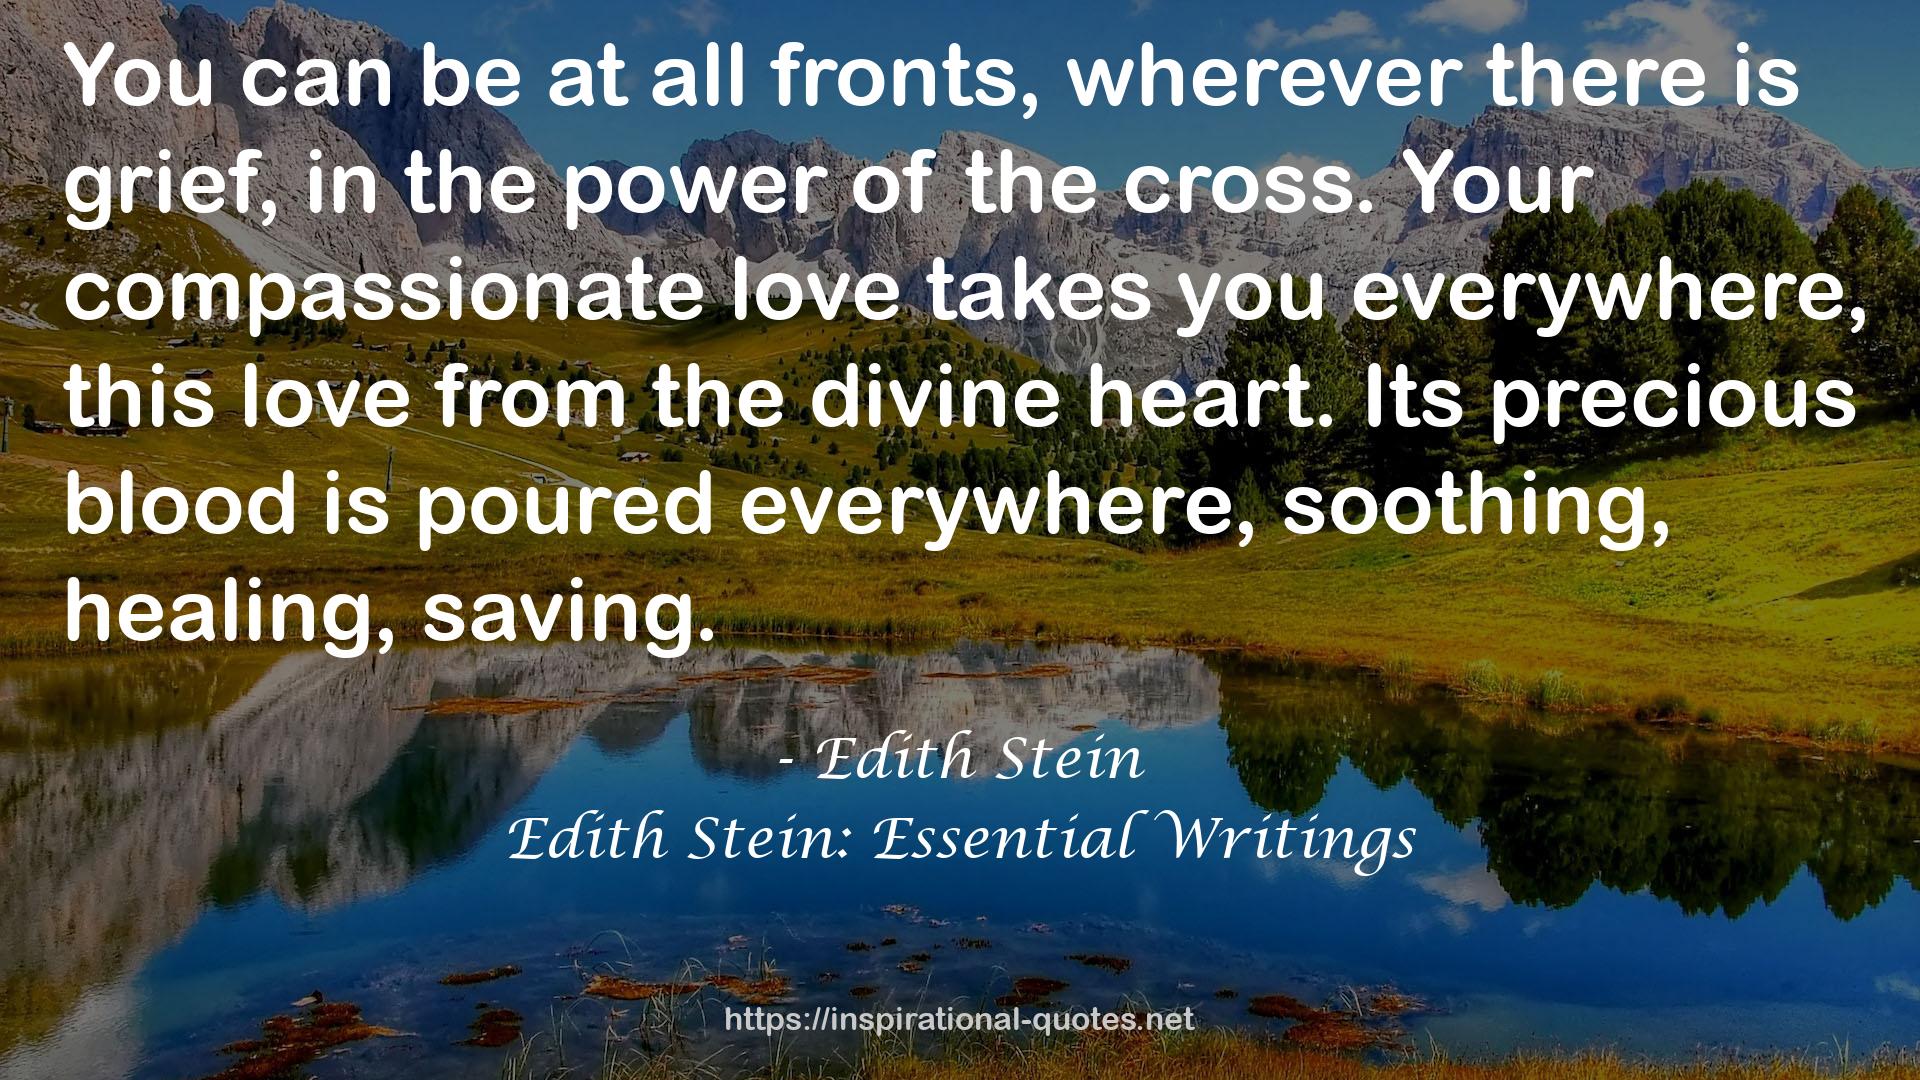 Edith Stein: Essential Writings QUOTES